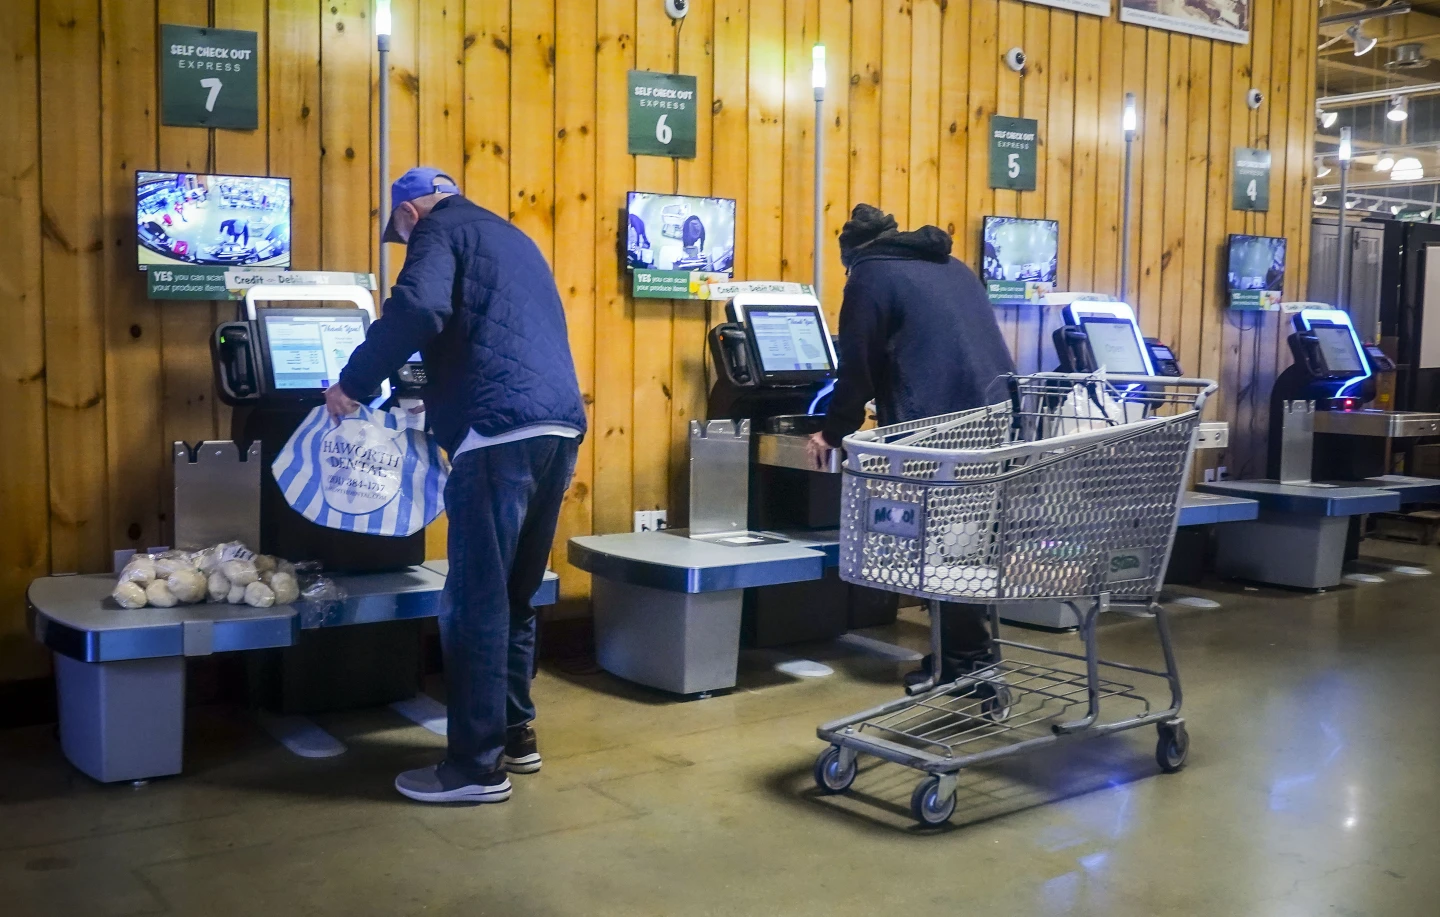 Love it or hate it, self-checkout is here to stay. But it’s going through a reckoning